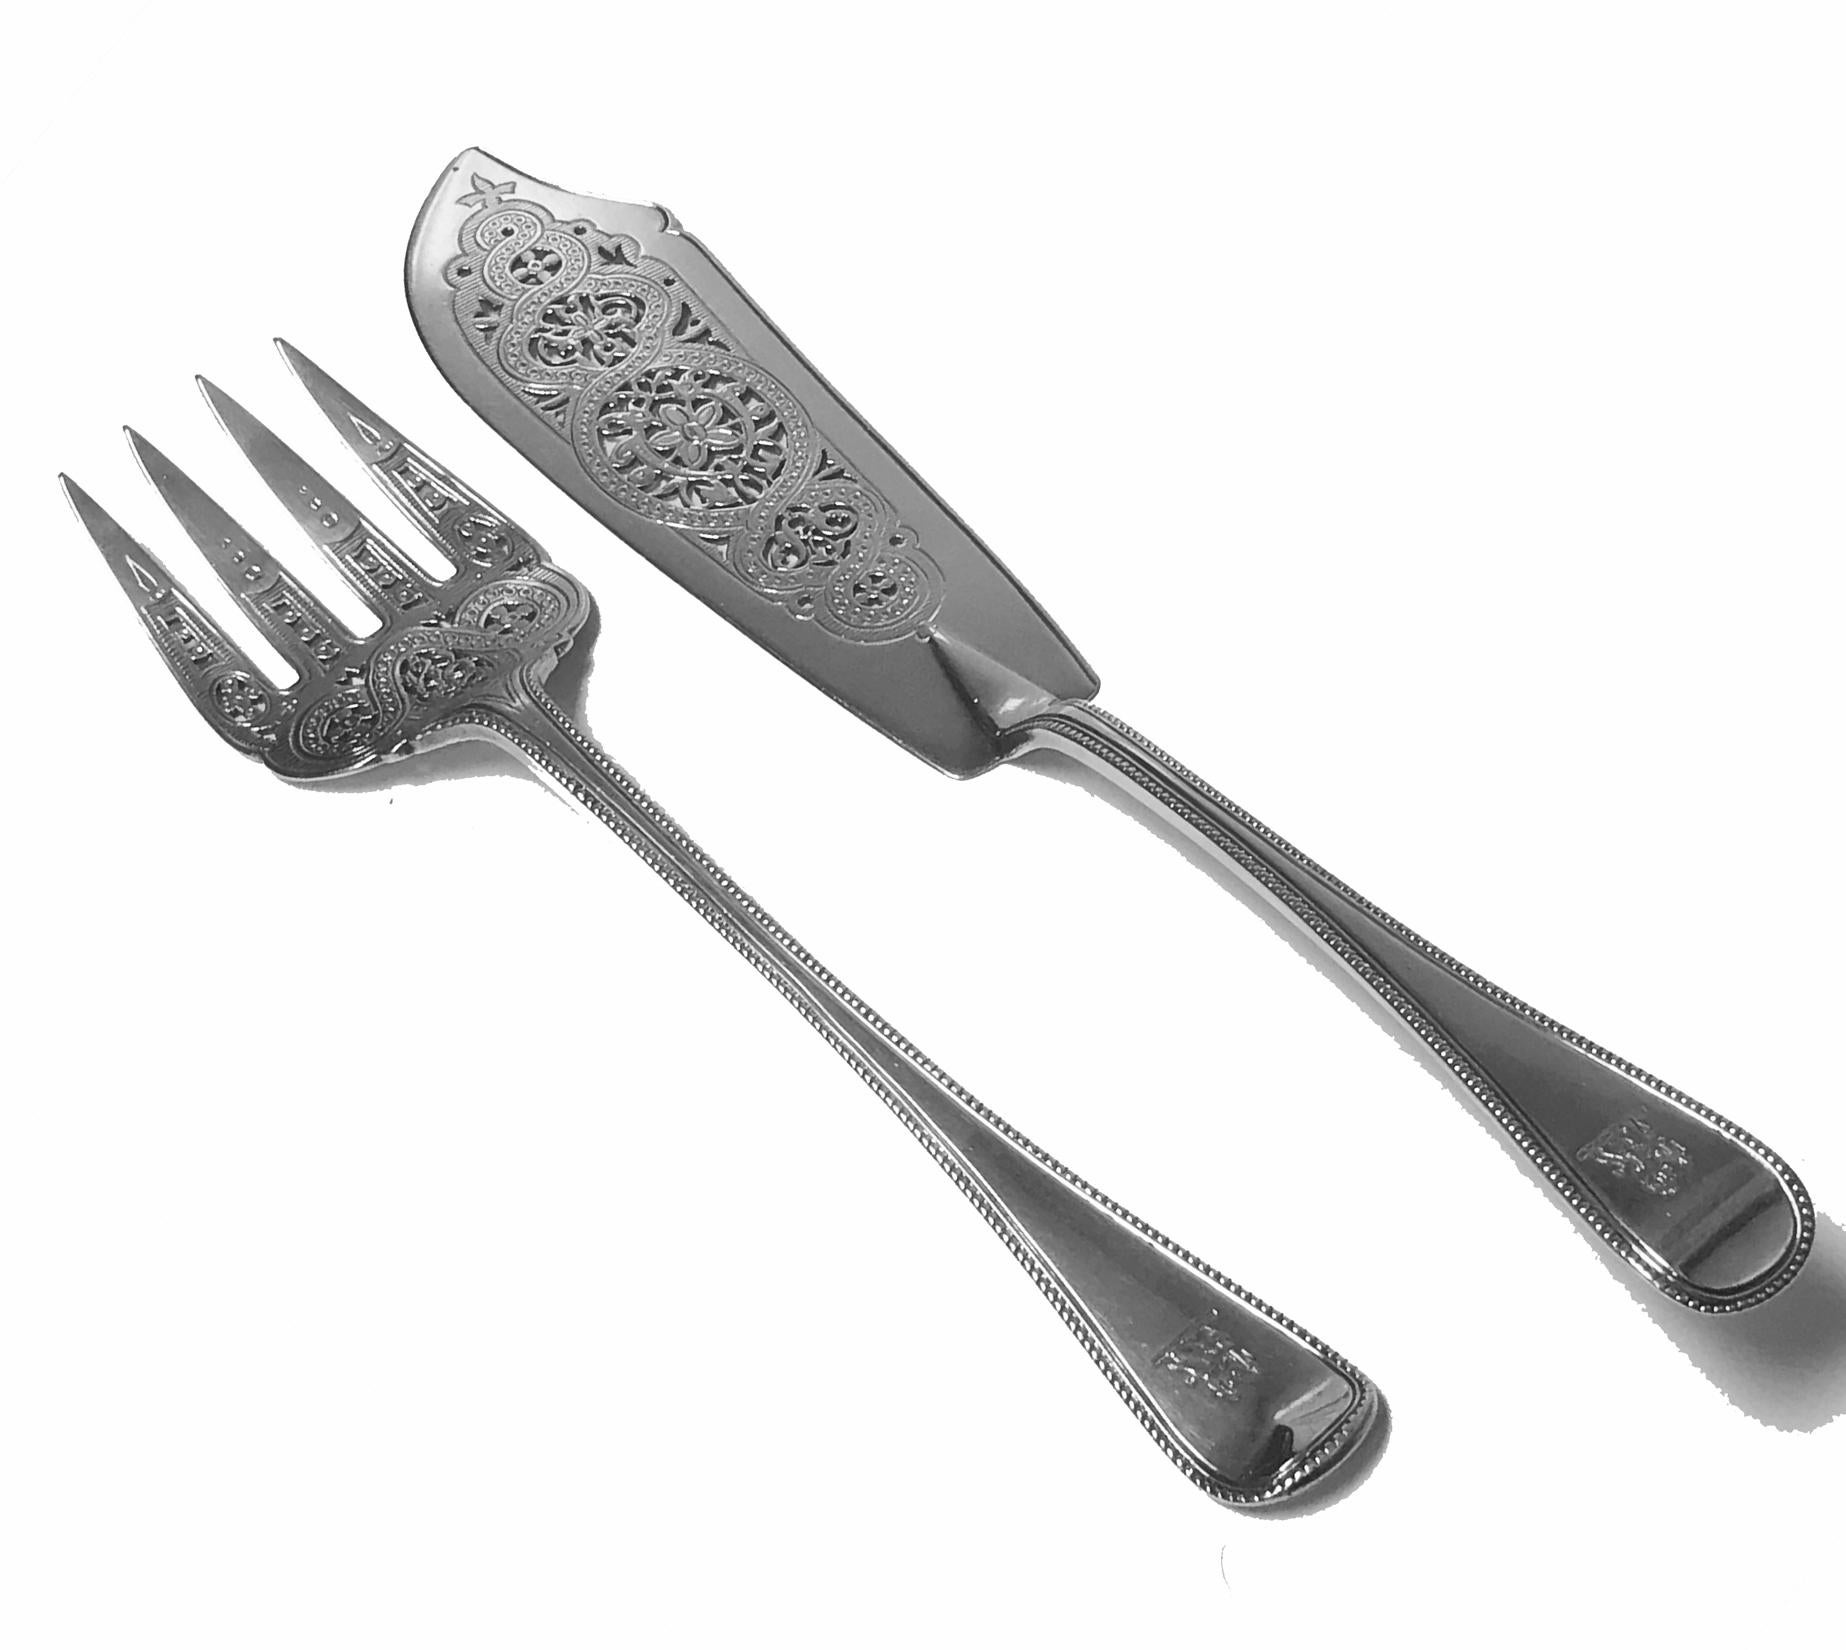 Pair of antique silver fish servers, London 1868 Geo Adams. Bead pattern, engraved crest of a standing lion holding a spear within paws. The blade and tines pierced engraved foliate design. Length of Knife: 11.70 inches. Length of fork: 10.25